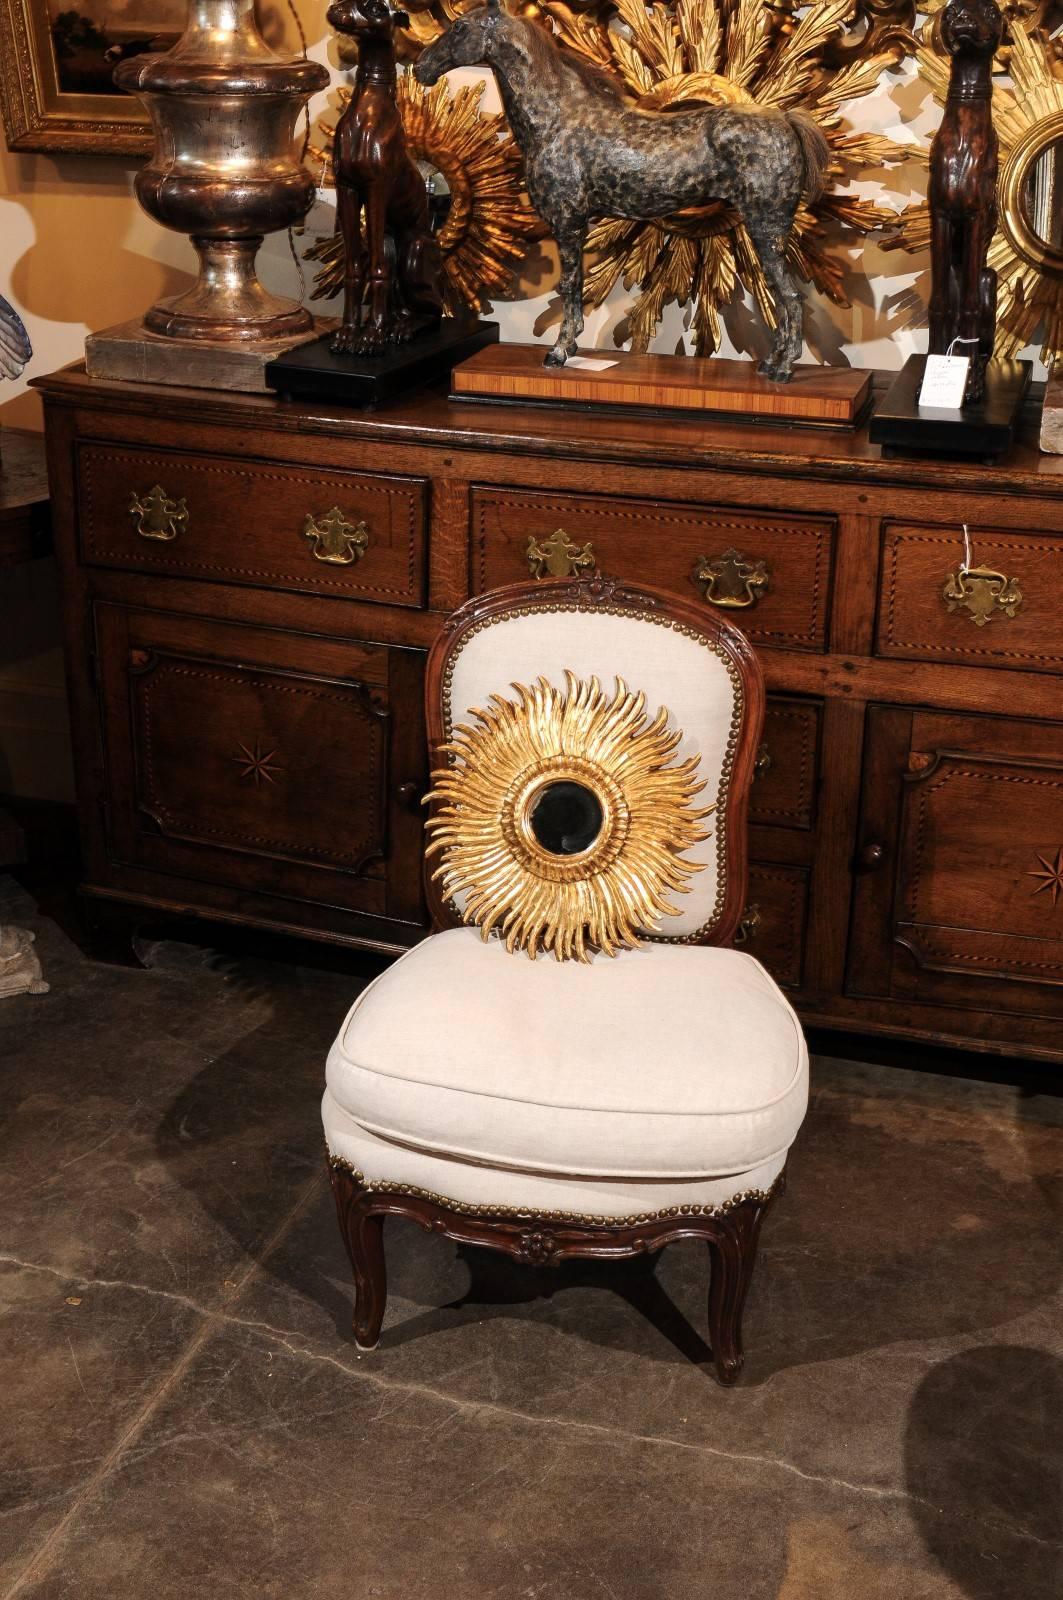 Mid-Century Modern French Giltwood Sunburst Mirror with Wavy Sunrays from the Mid-20th Century